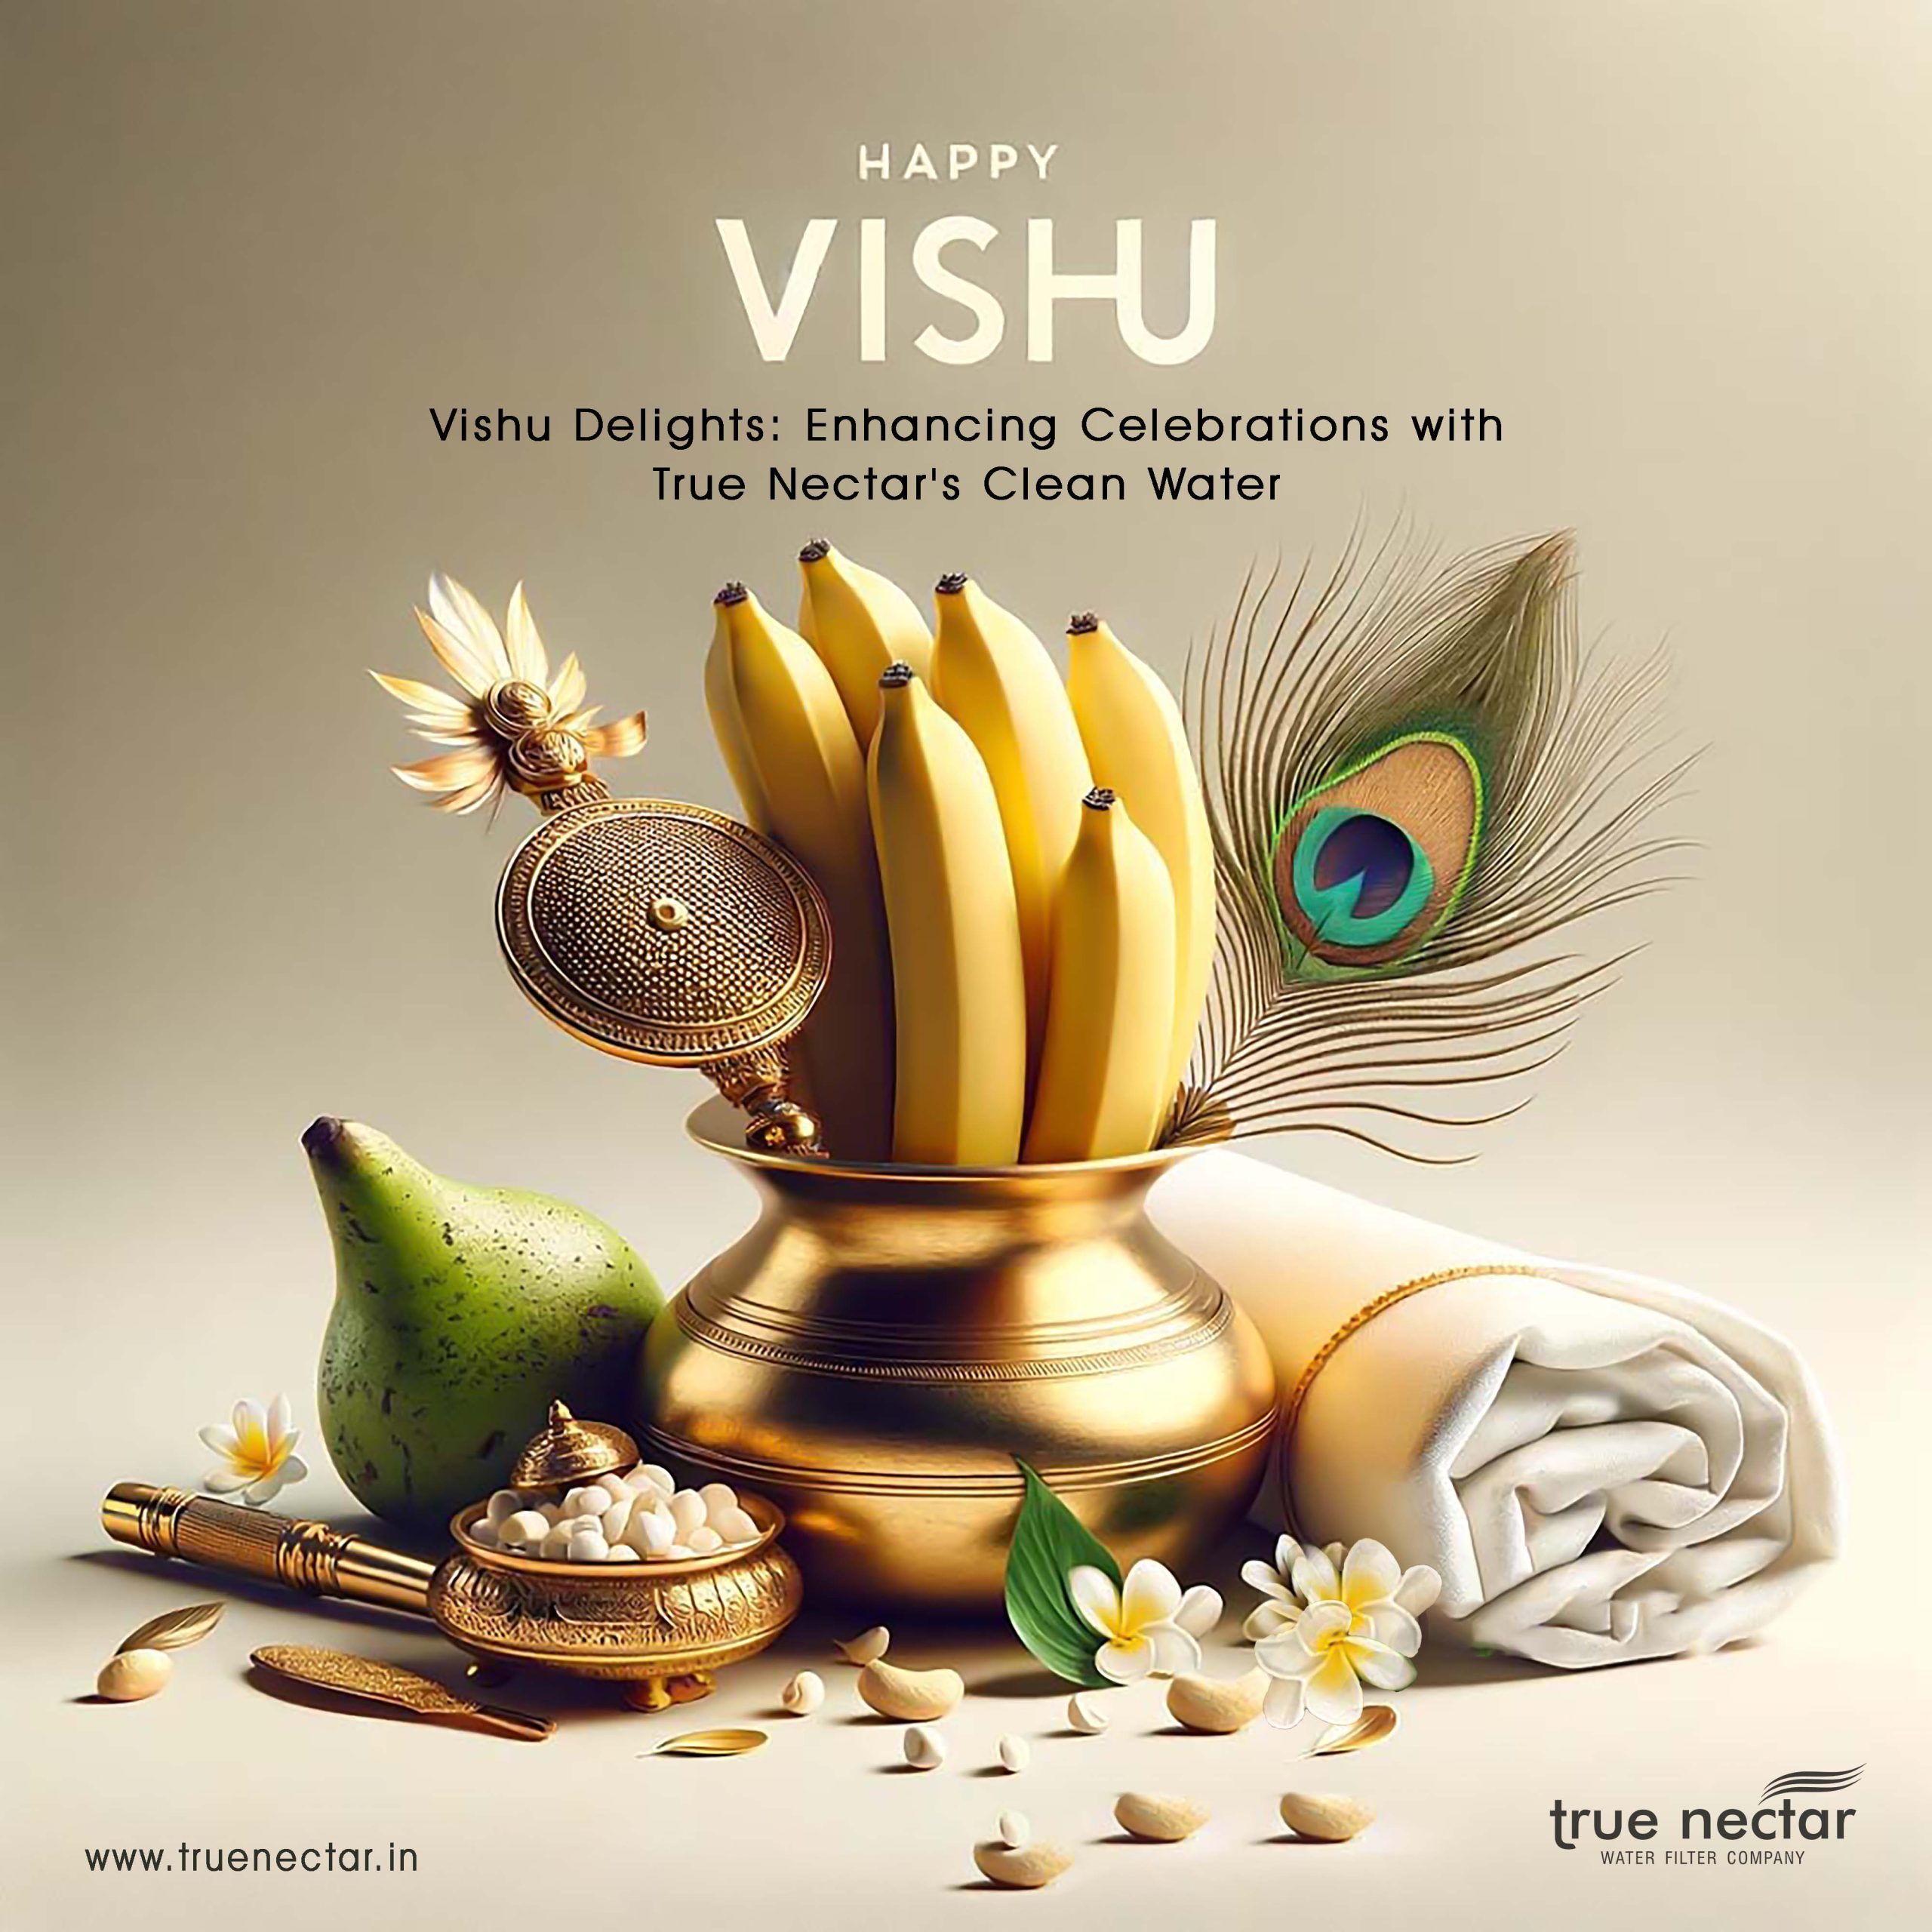 Vishu Delights - Enhancing Celebrations with True Nectar's Clean Water